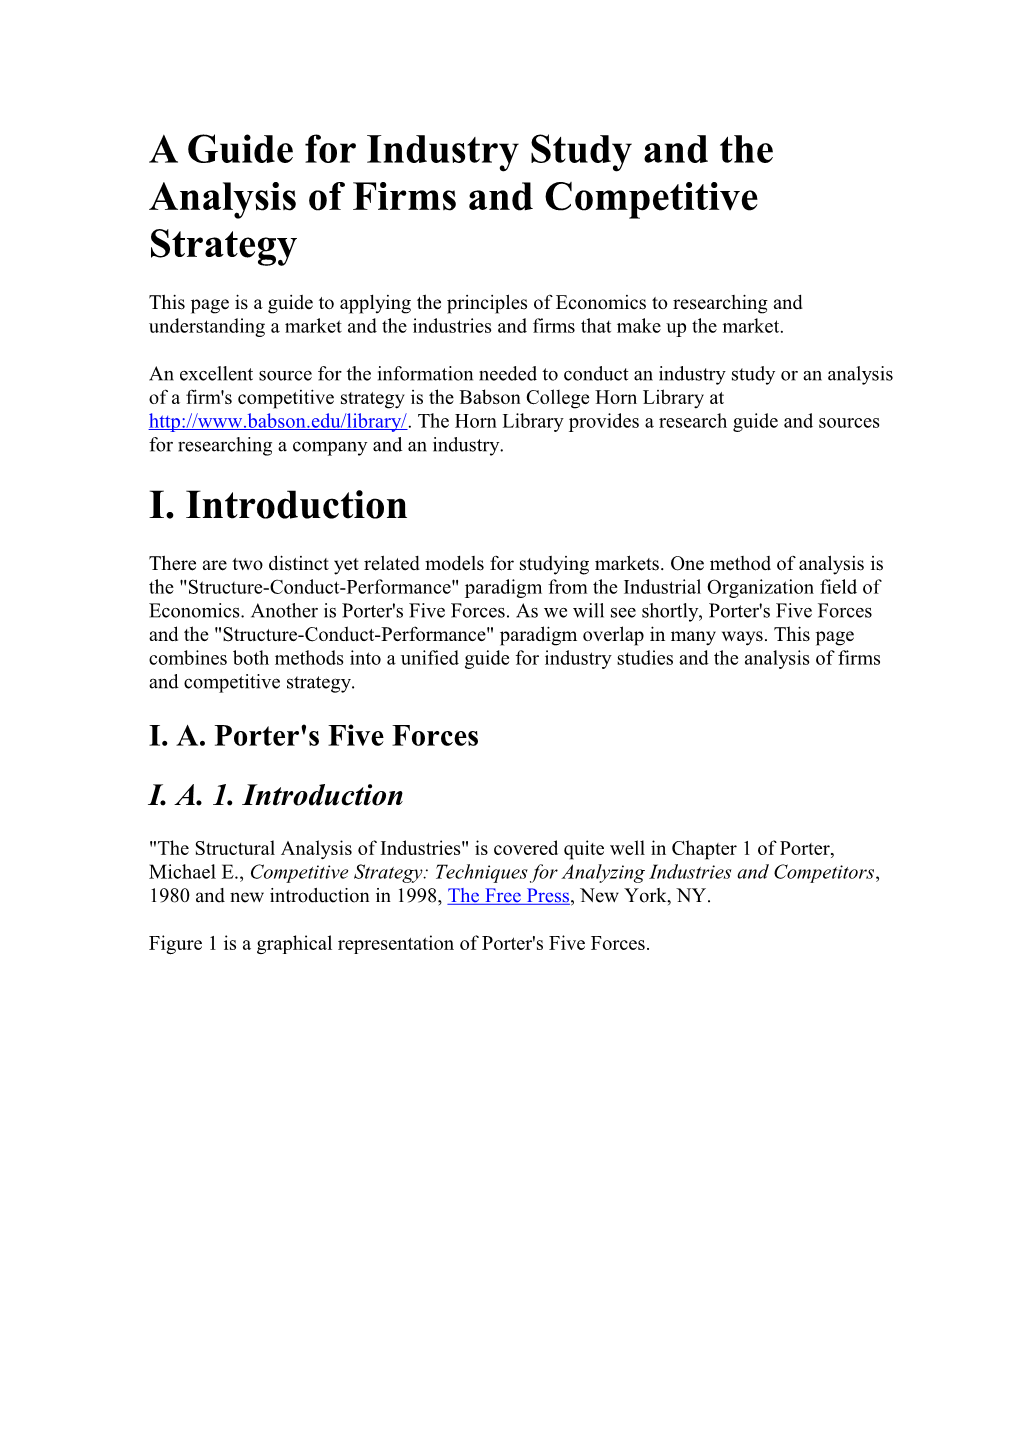 A Guide for Industry Study and the Analysis of Firms and Competitive Strategy